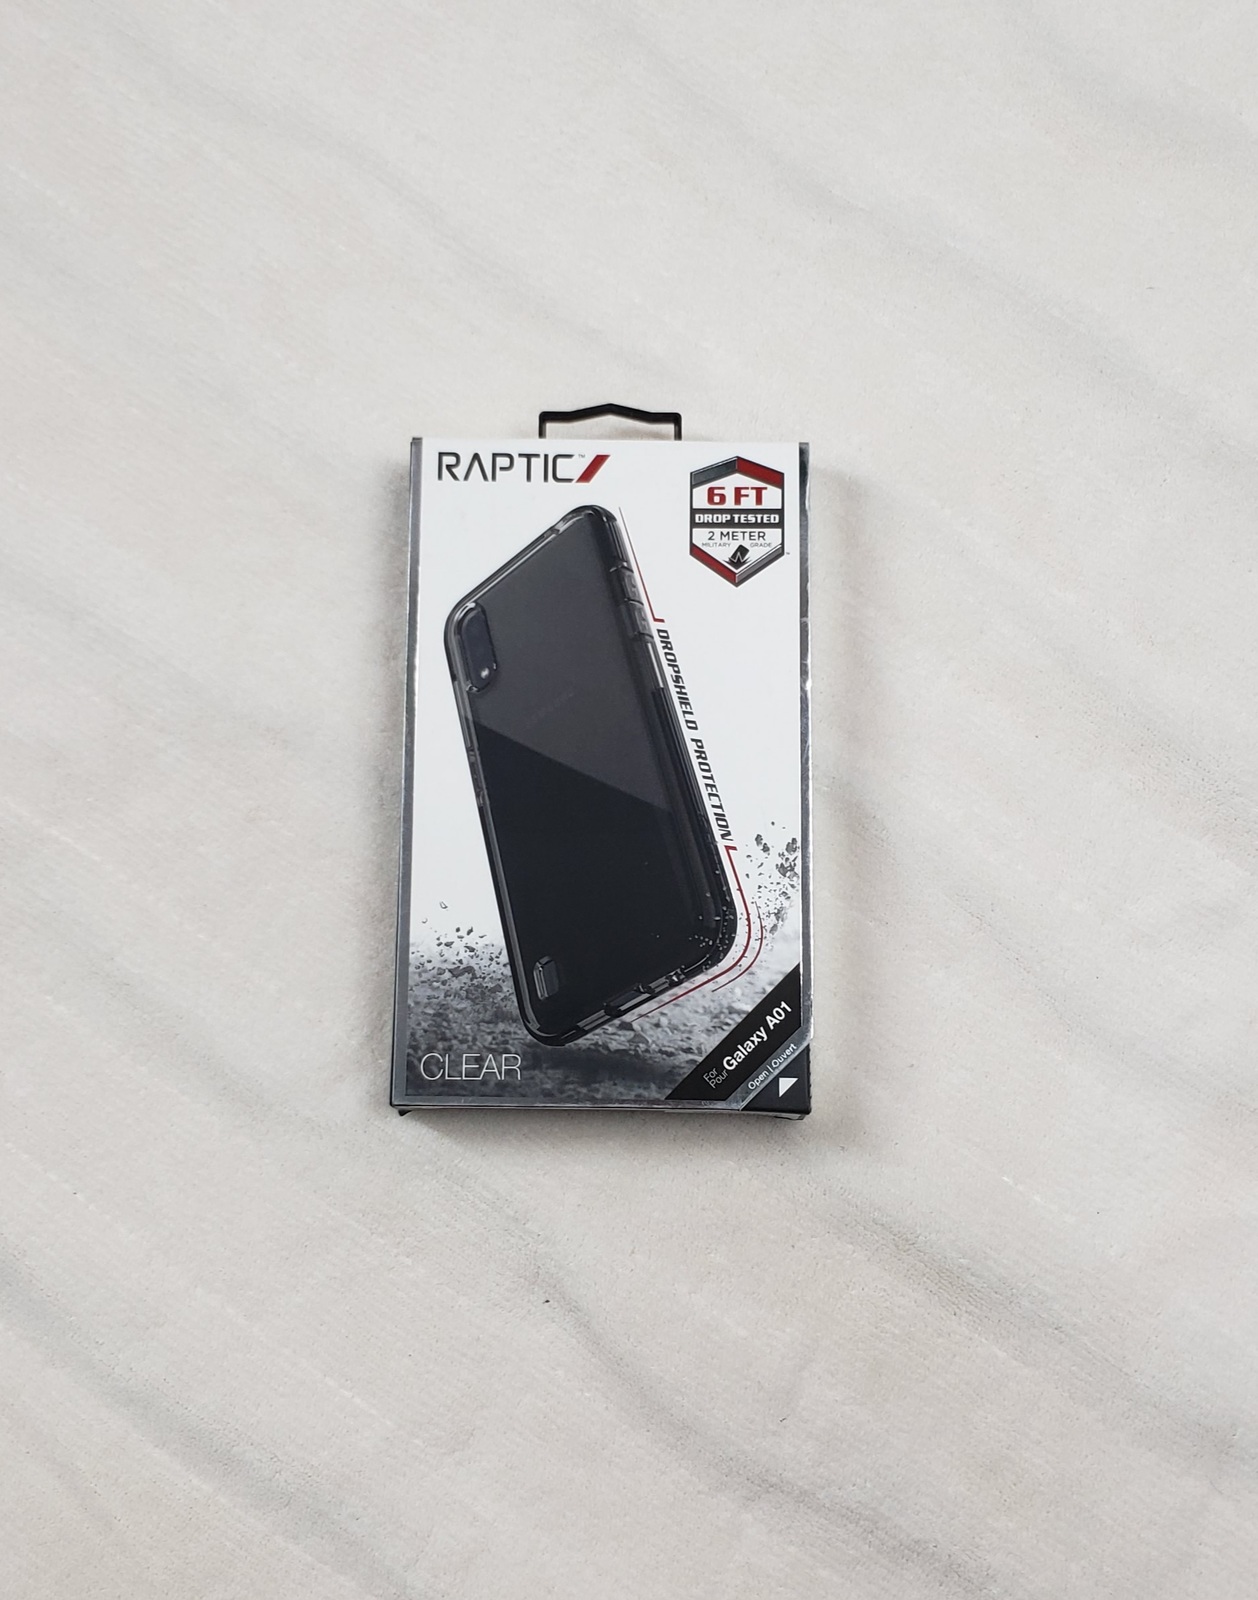 A01 Samsung Galaxy Compatible Clear Cell Phone Case Raptic 6' Dropshield Sealed - $11.00